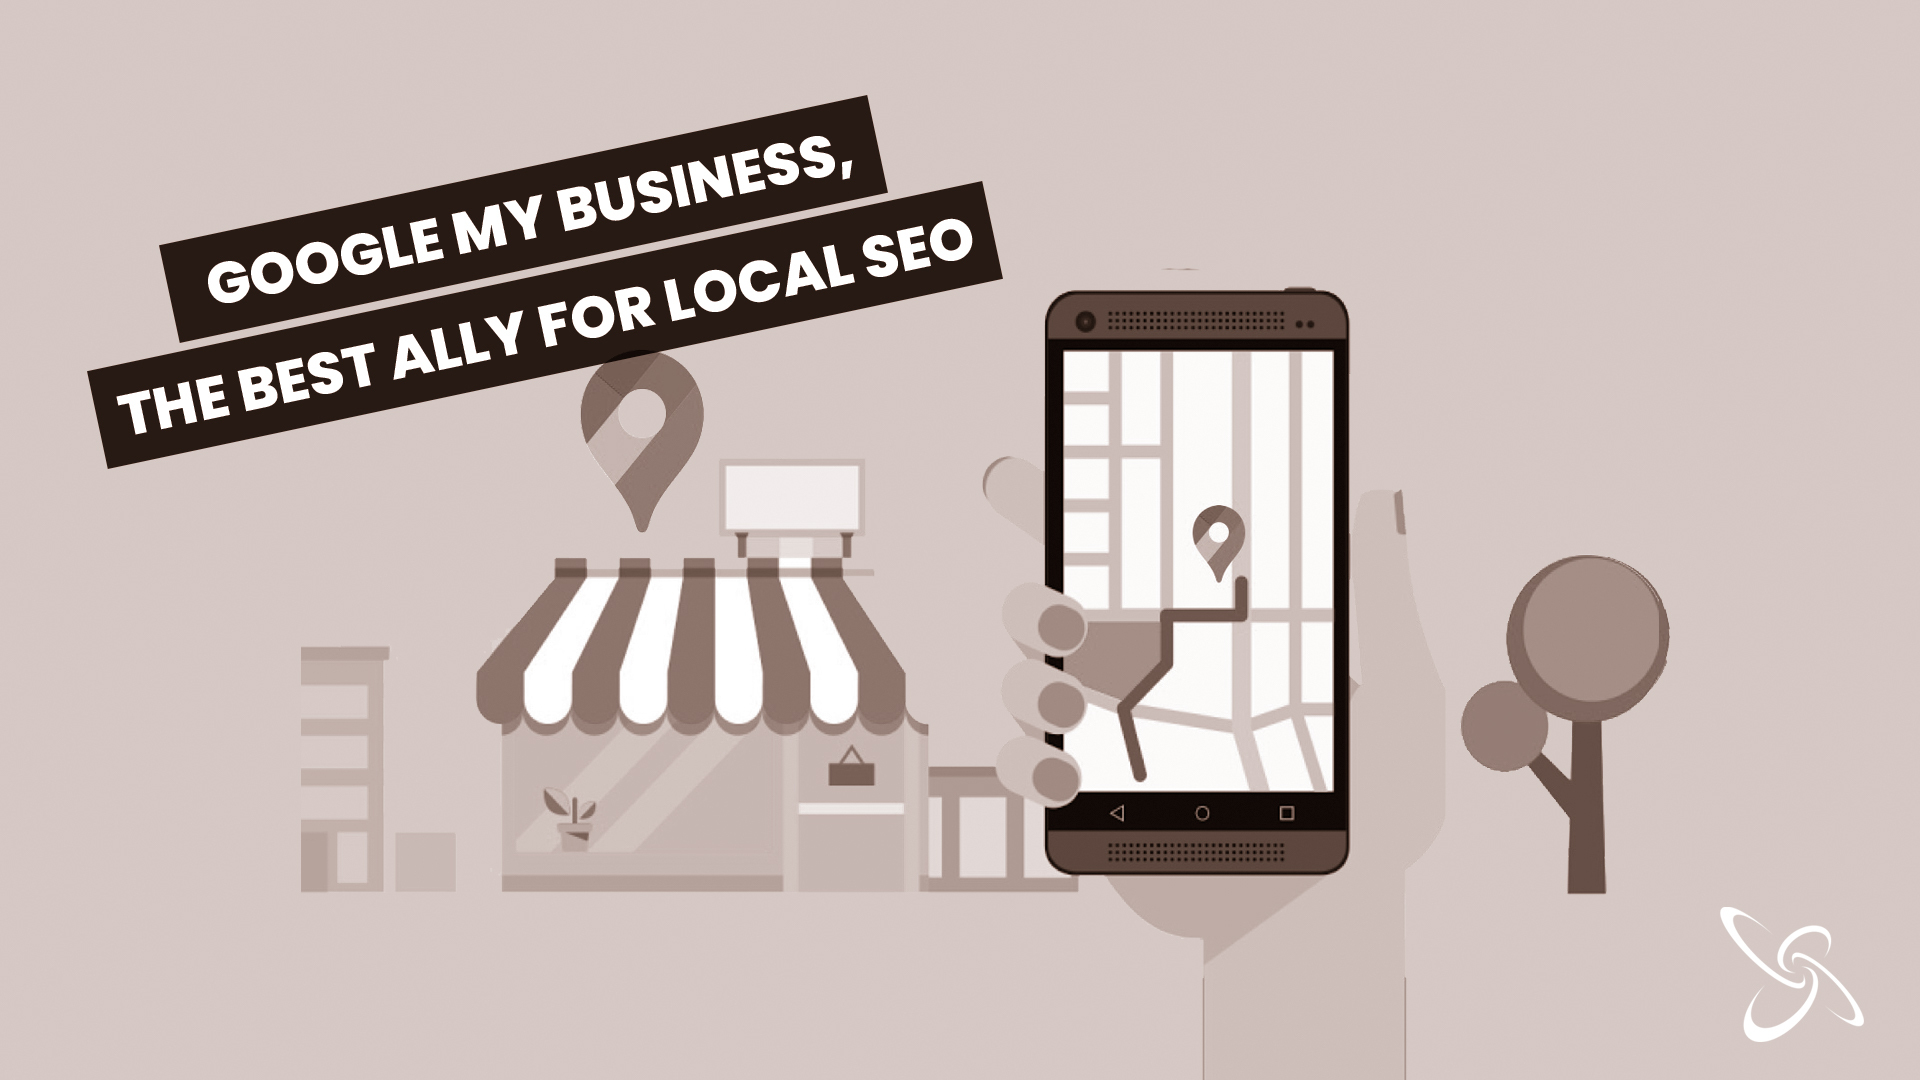 google my business, the best ally for local seo